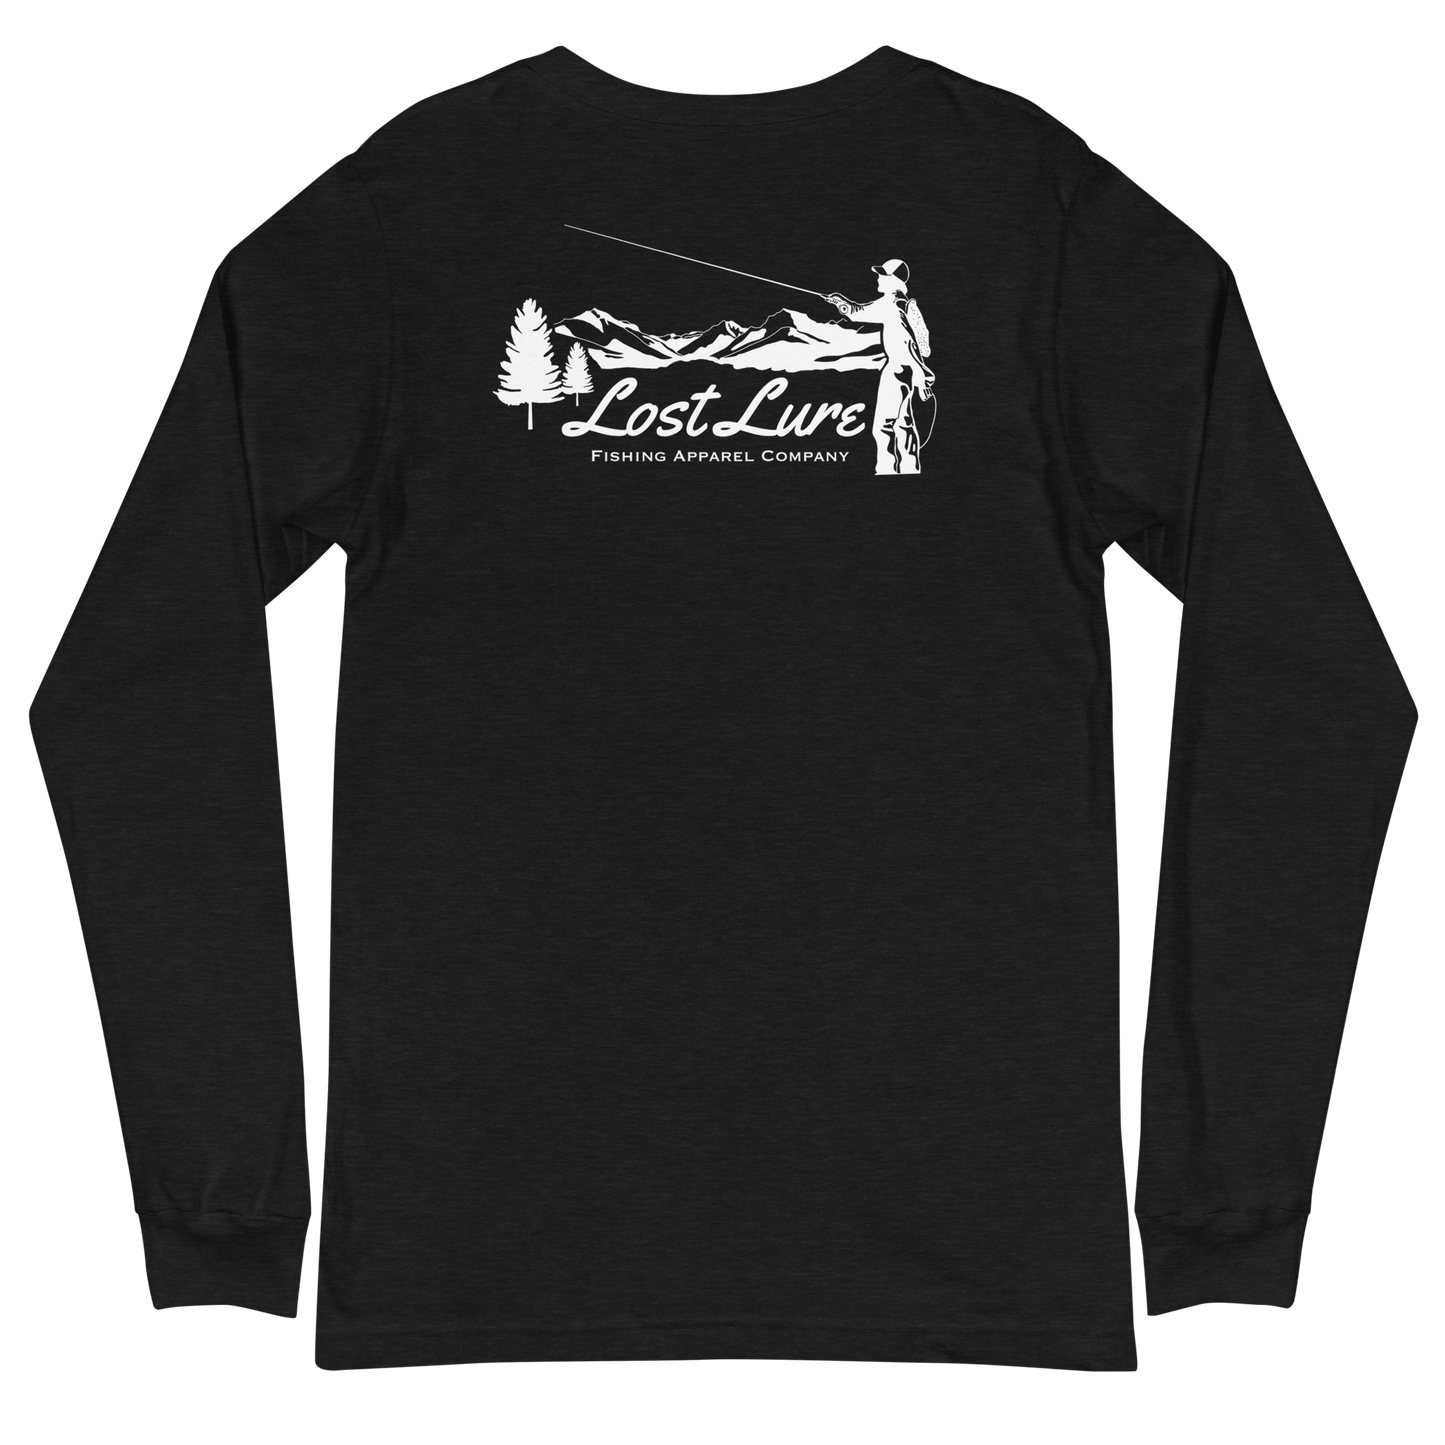 Fly fishing Lost lure long sleeve shirt. It has a design on the back of the shirt black and white outline a fly fisherman and the Rocky Mountains. Black fishing shirt, back side